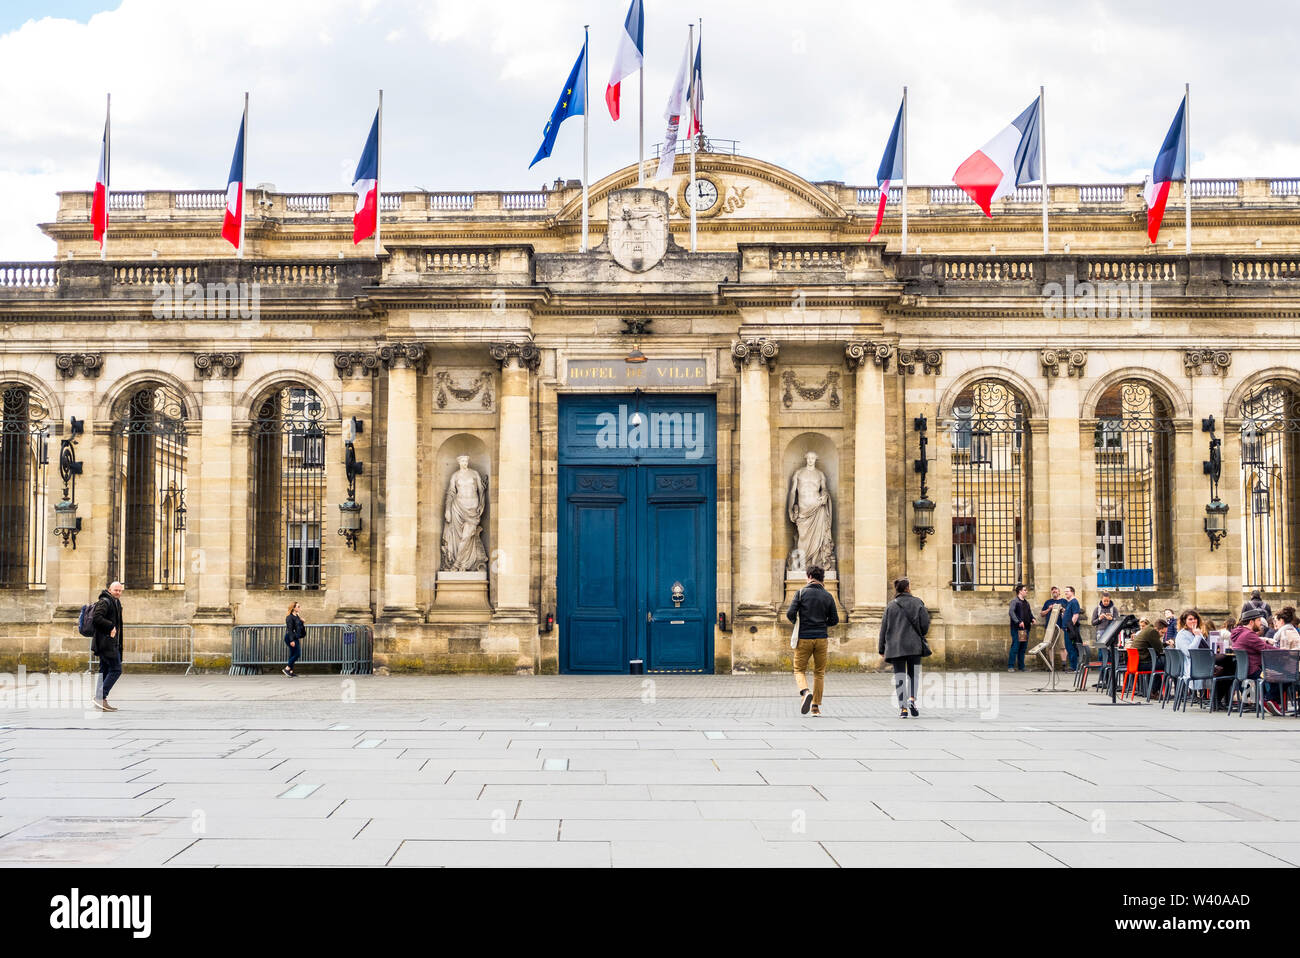 Bordeaux, France - May 5, 2019 : A Place Pey Berland in front of the City Hall with street cafes where people relax. Bordeaux, Aquitaine, France Stock Photo